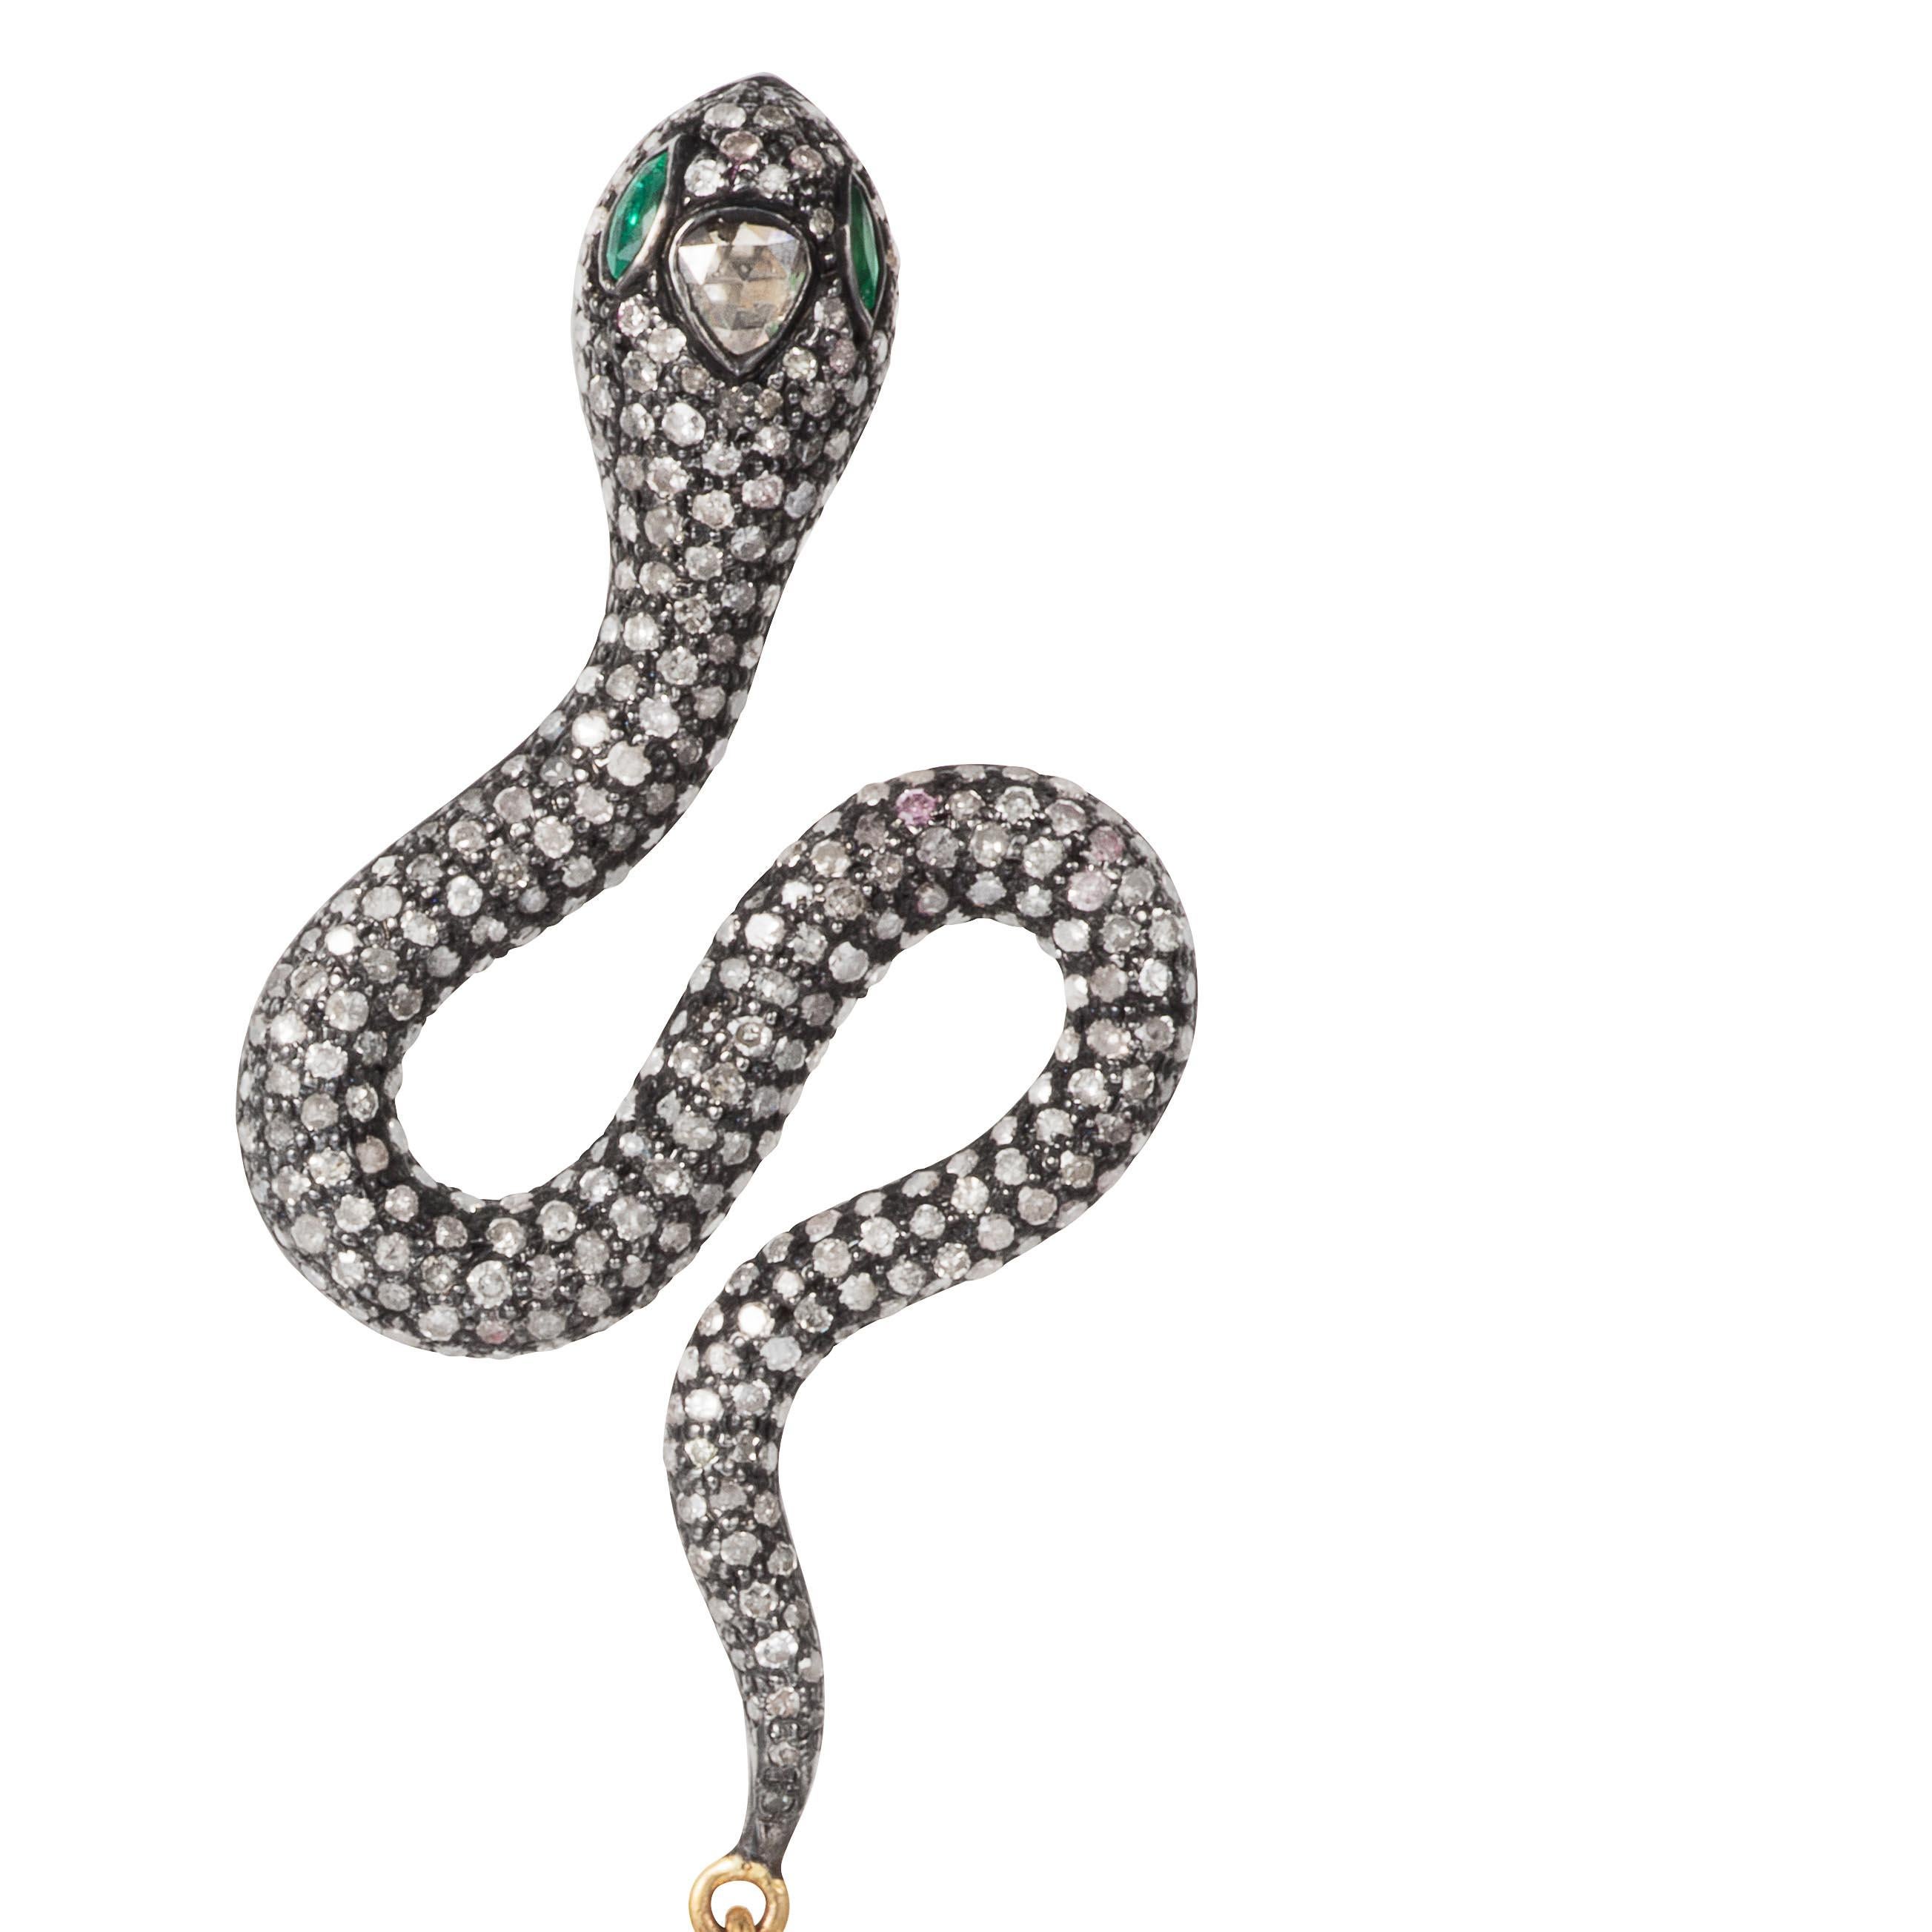 Contemporary Manpriya B Diamond, Emerald and Baroque Pearl Serpent Dangling Earrings For Sale